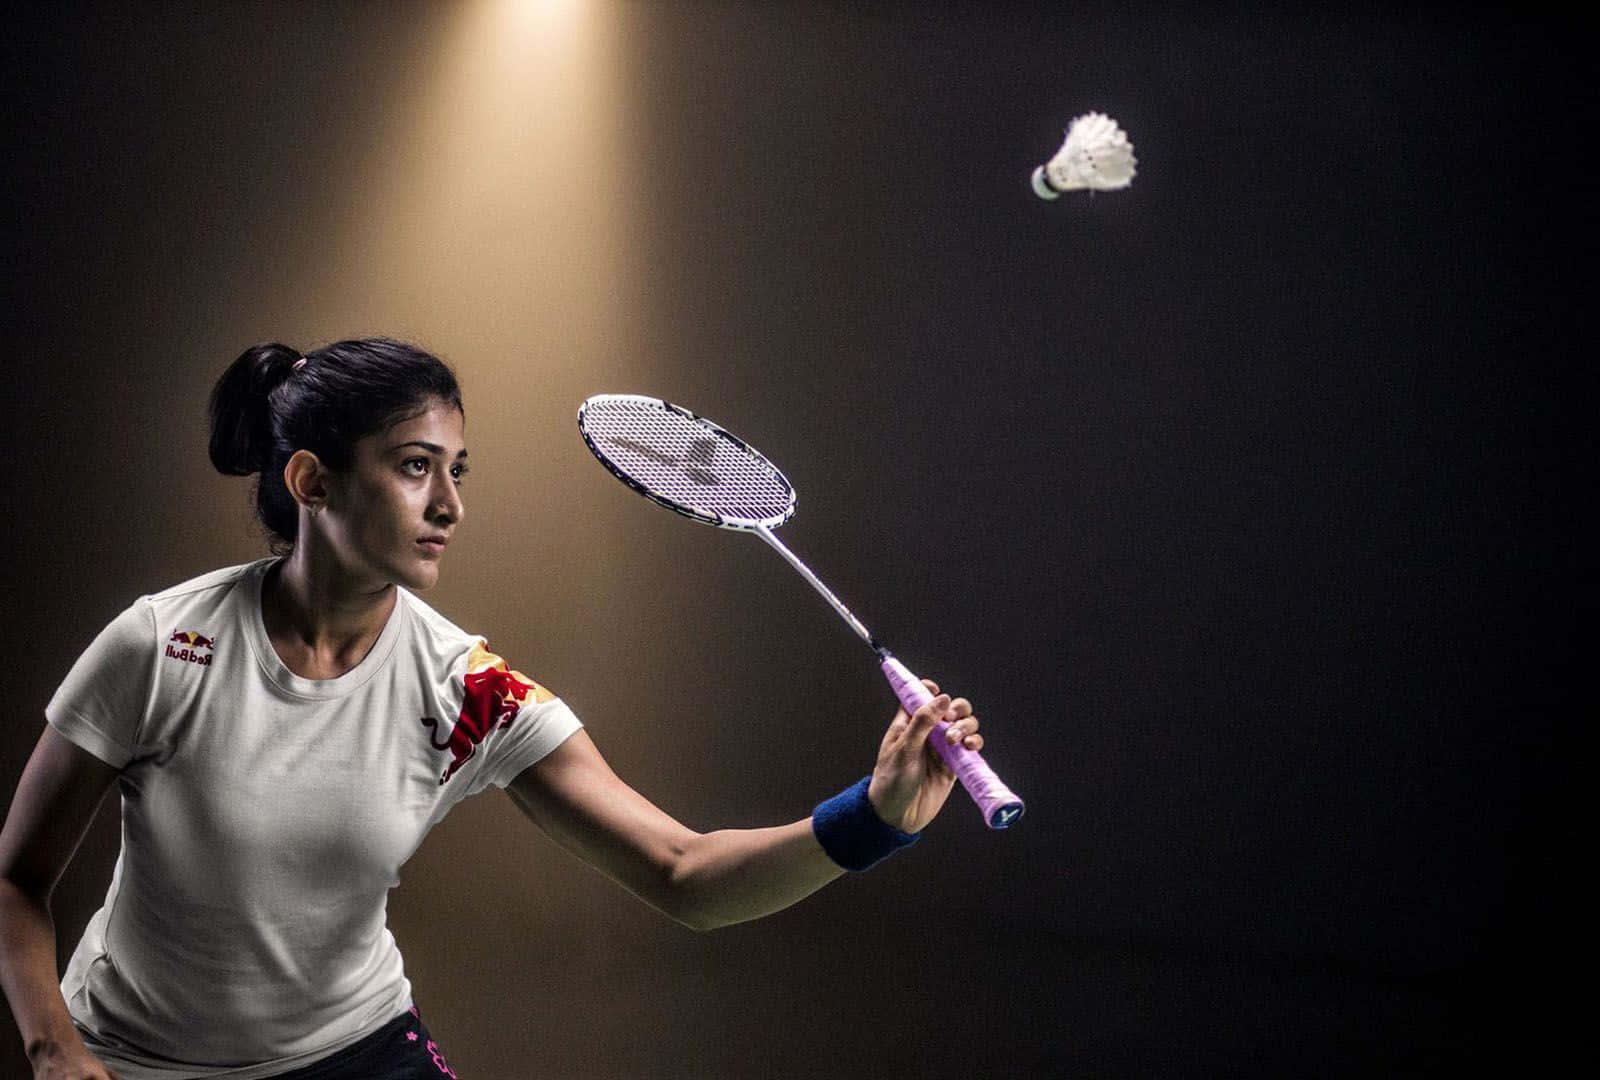 The joy of competing in a world-class badminton match